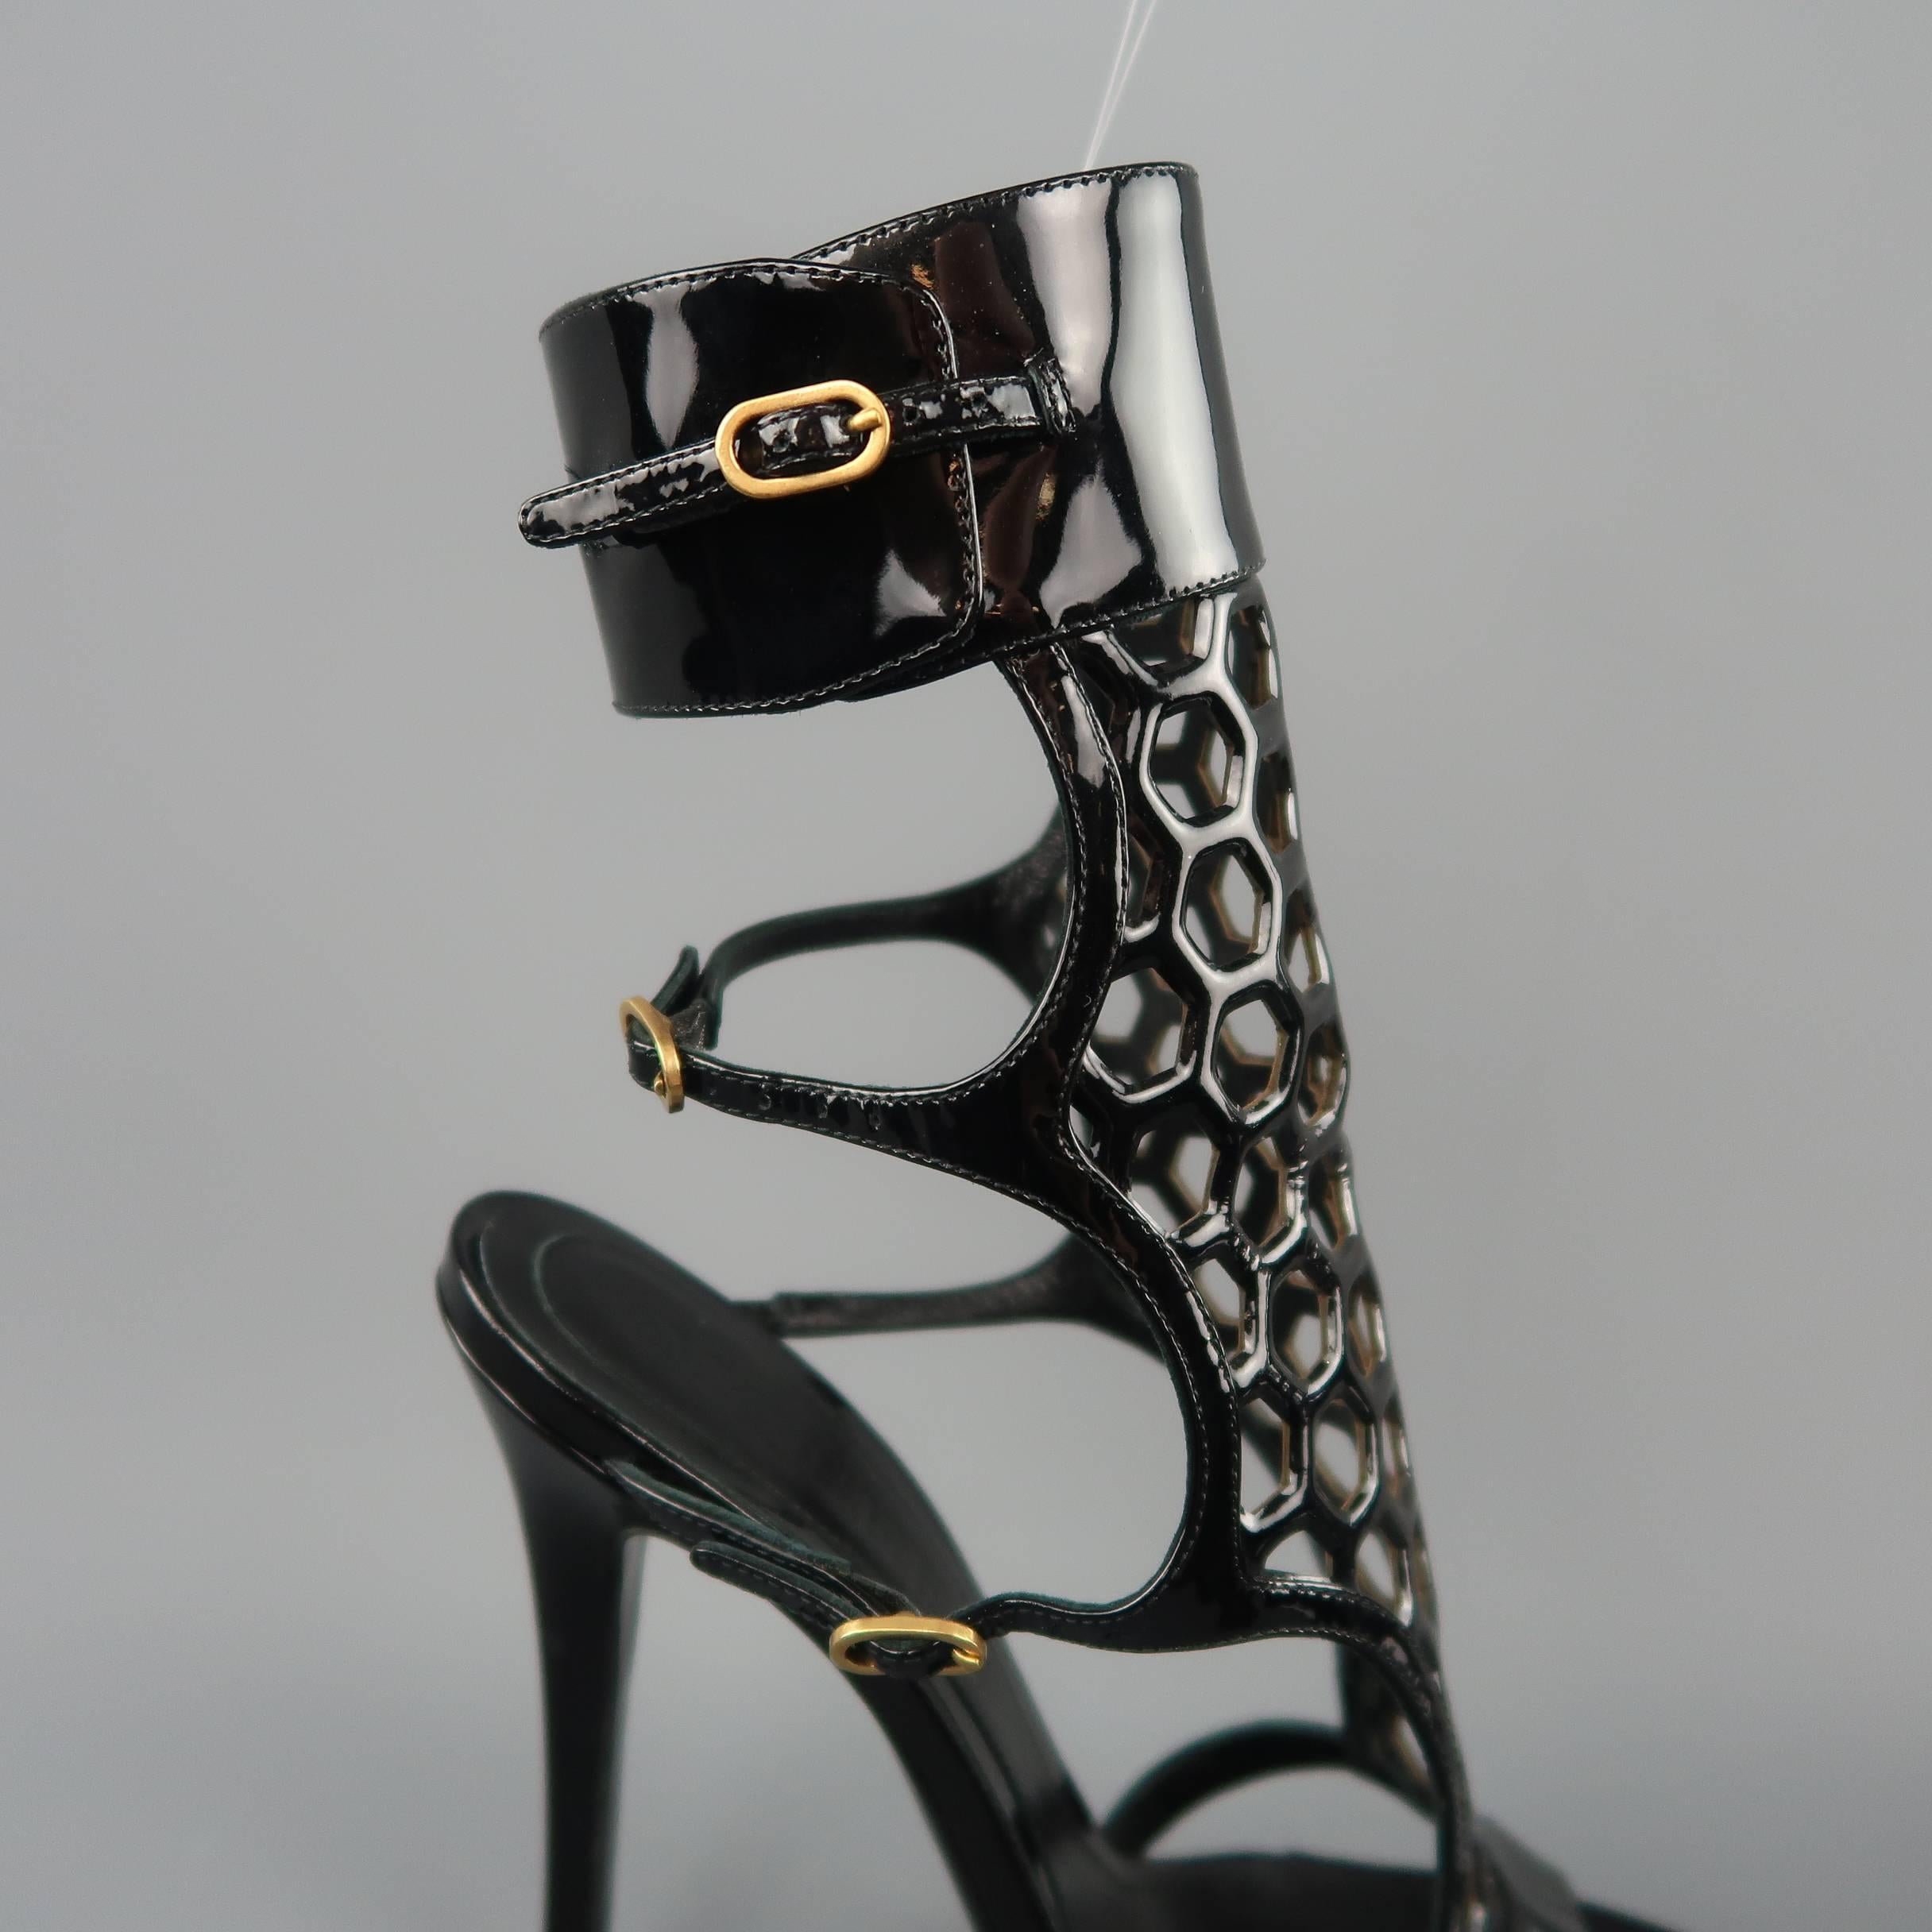 ALEXANDER MCQUEEN sandals come in black patent leather with double buckle side straps, thick ankle strap and honeycomb pattern cutout frontal panel. Worn once. Made in Italy.
 
Excellent Pre-Owned Condition.
Marked: IT 39
 
Measurements:
 
Heel: 5